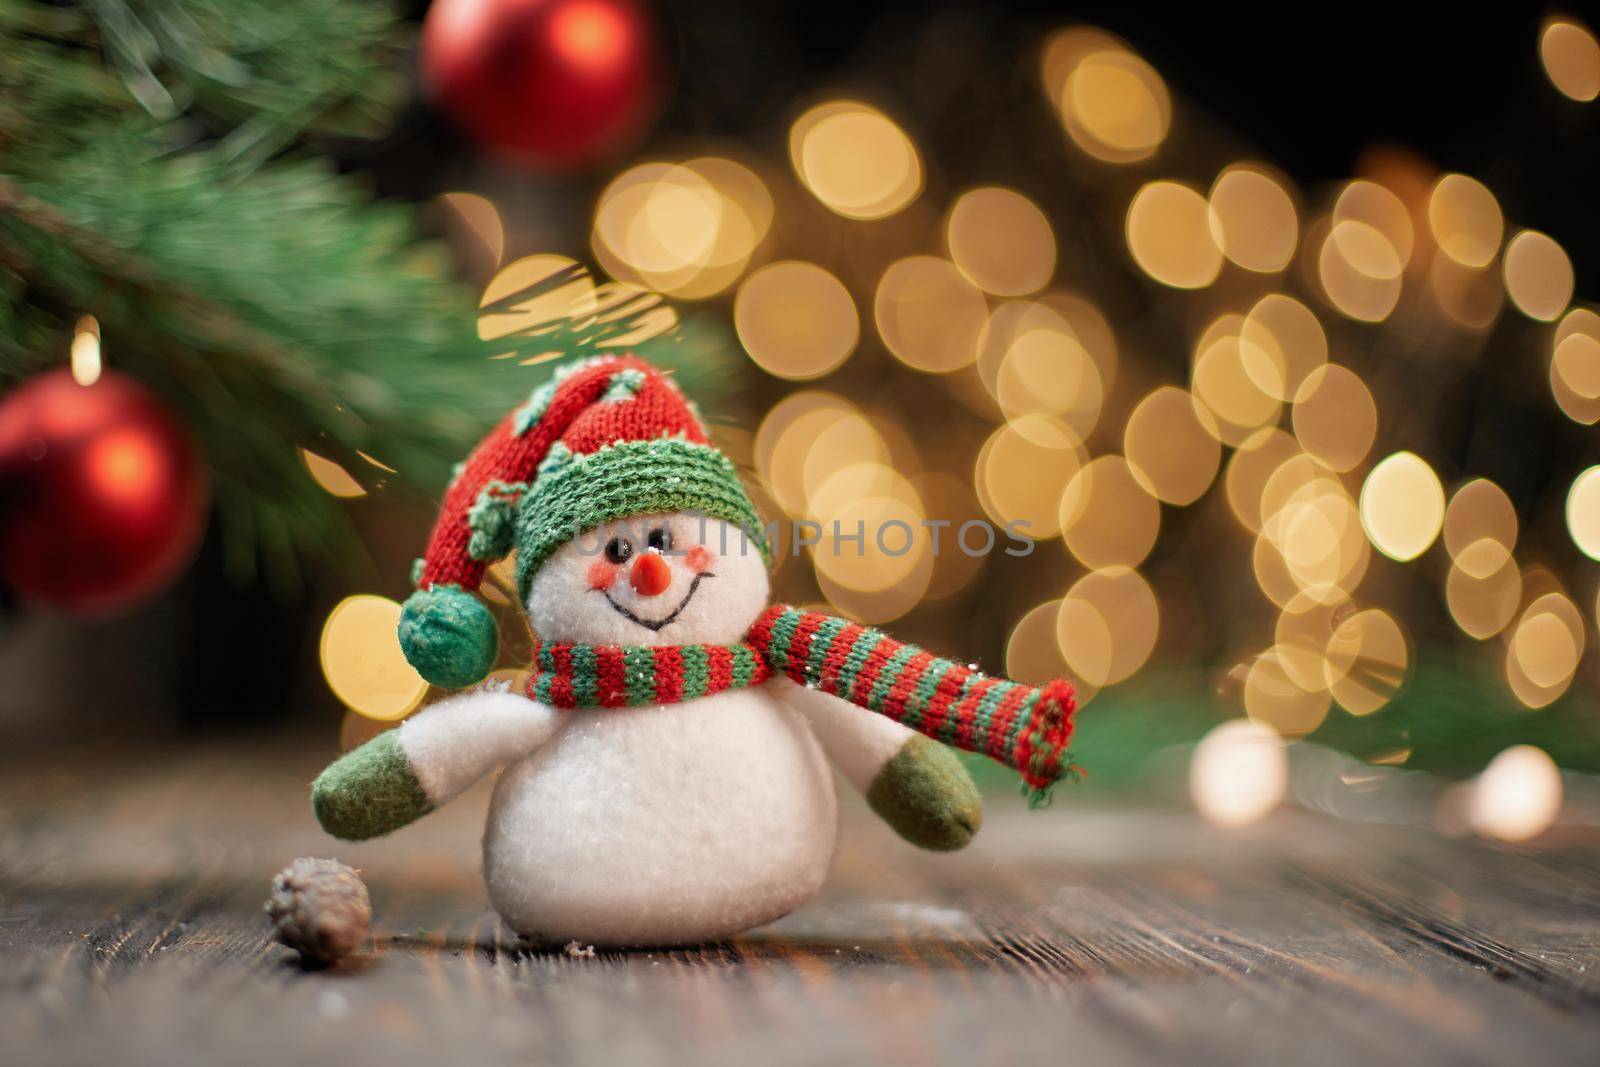 funny toy snowman on the background of Christmas lights. photo with a copy-space.